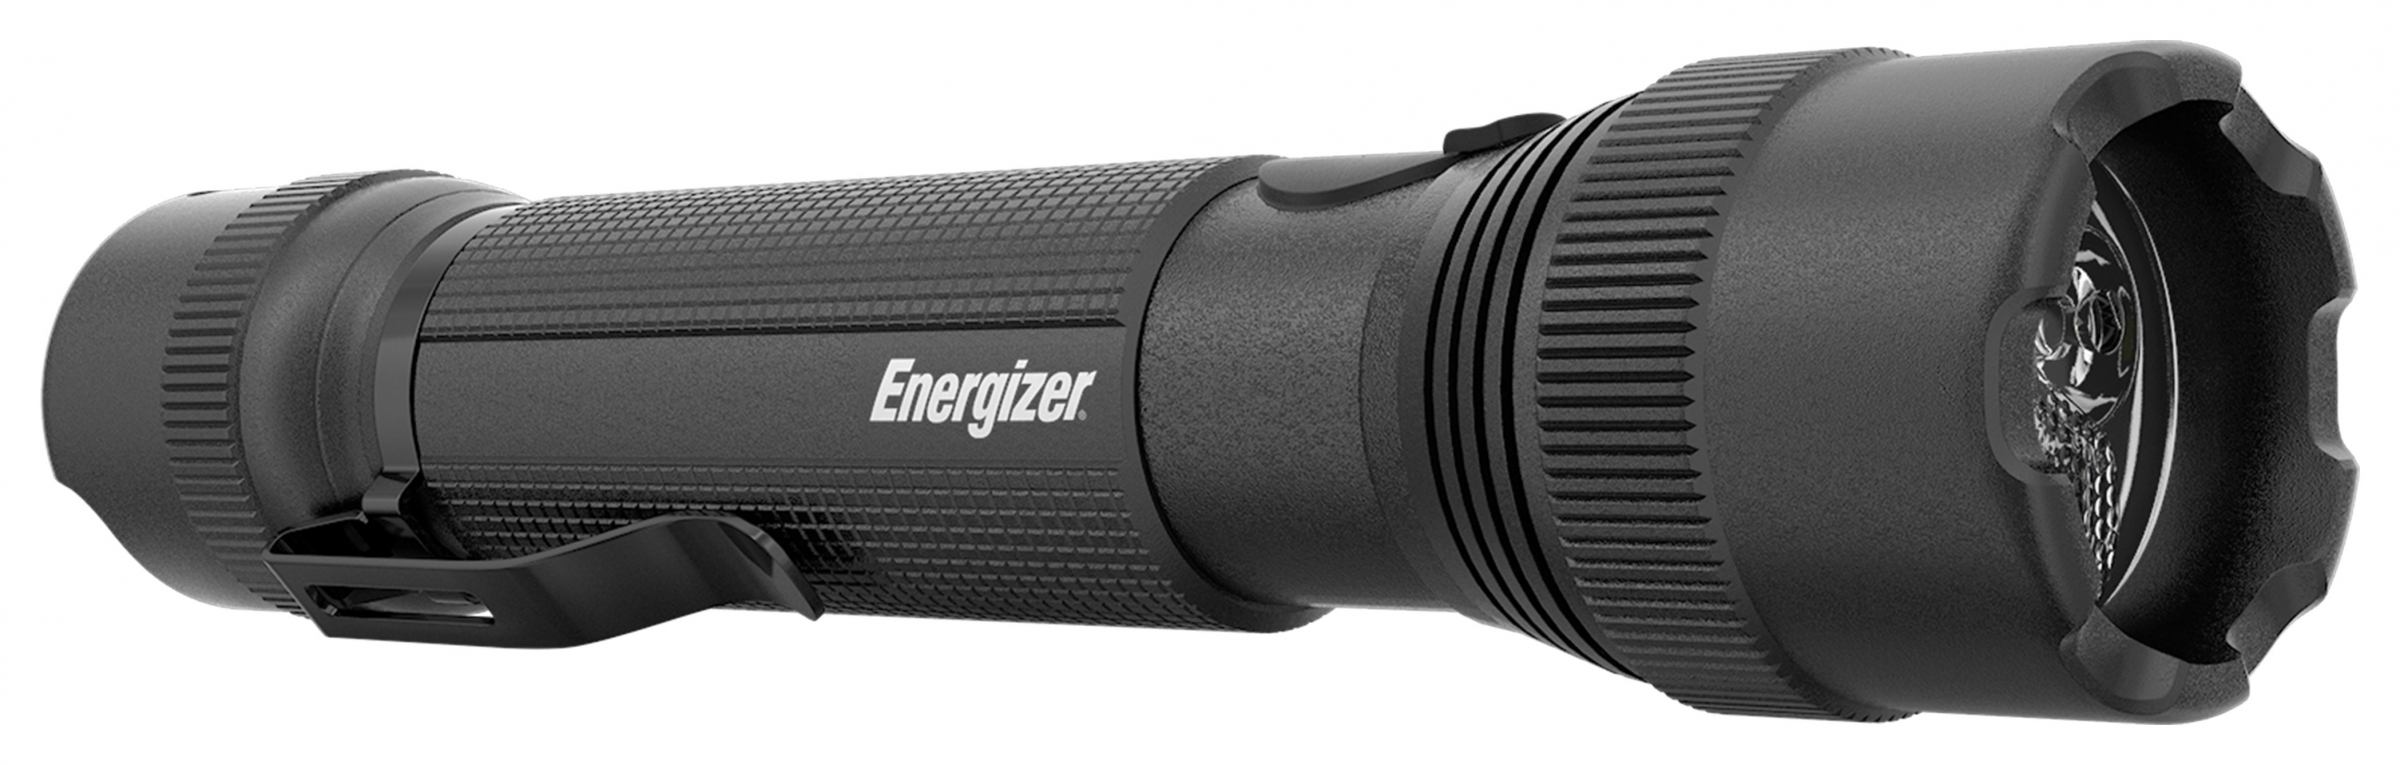 Energizer Tactical TAC-R700 Rechargeable 700 LM inkl. Akku